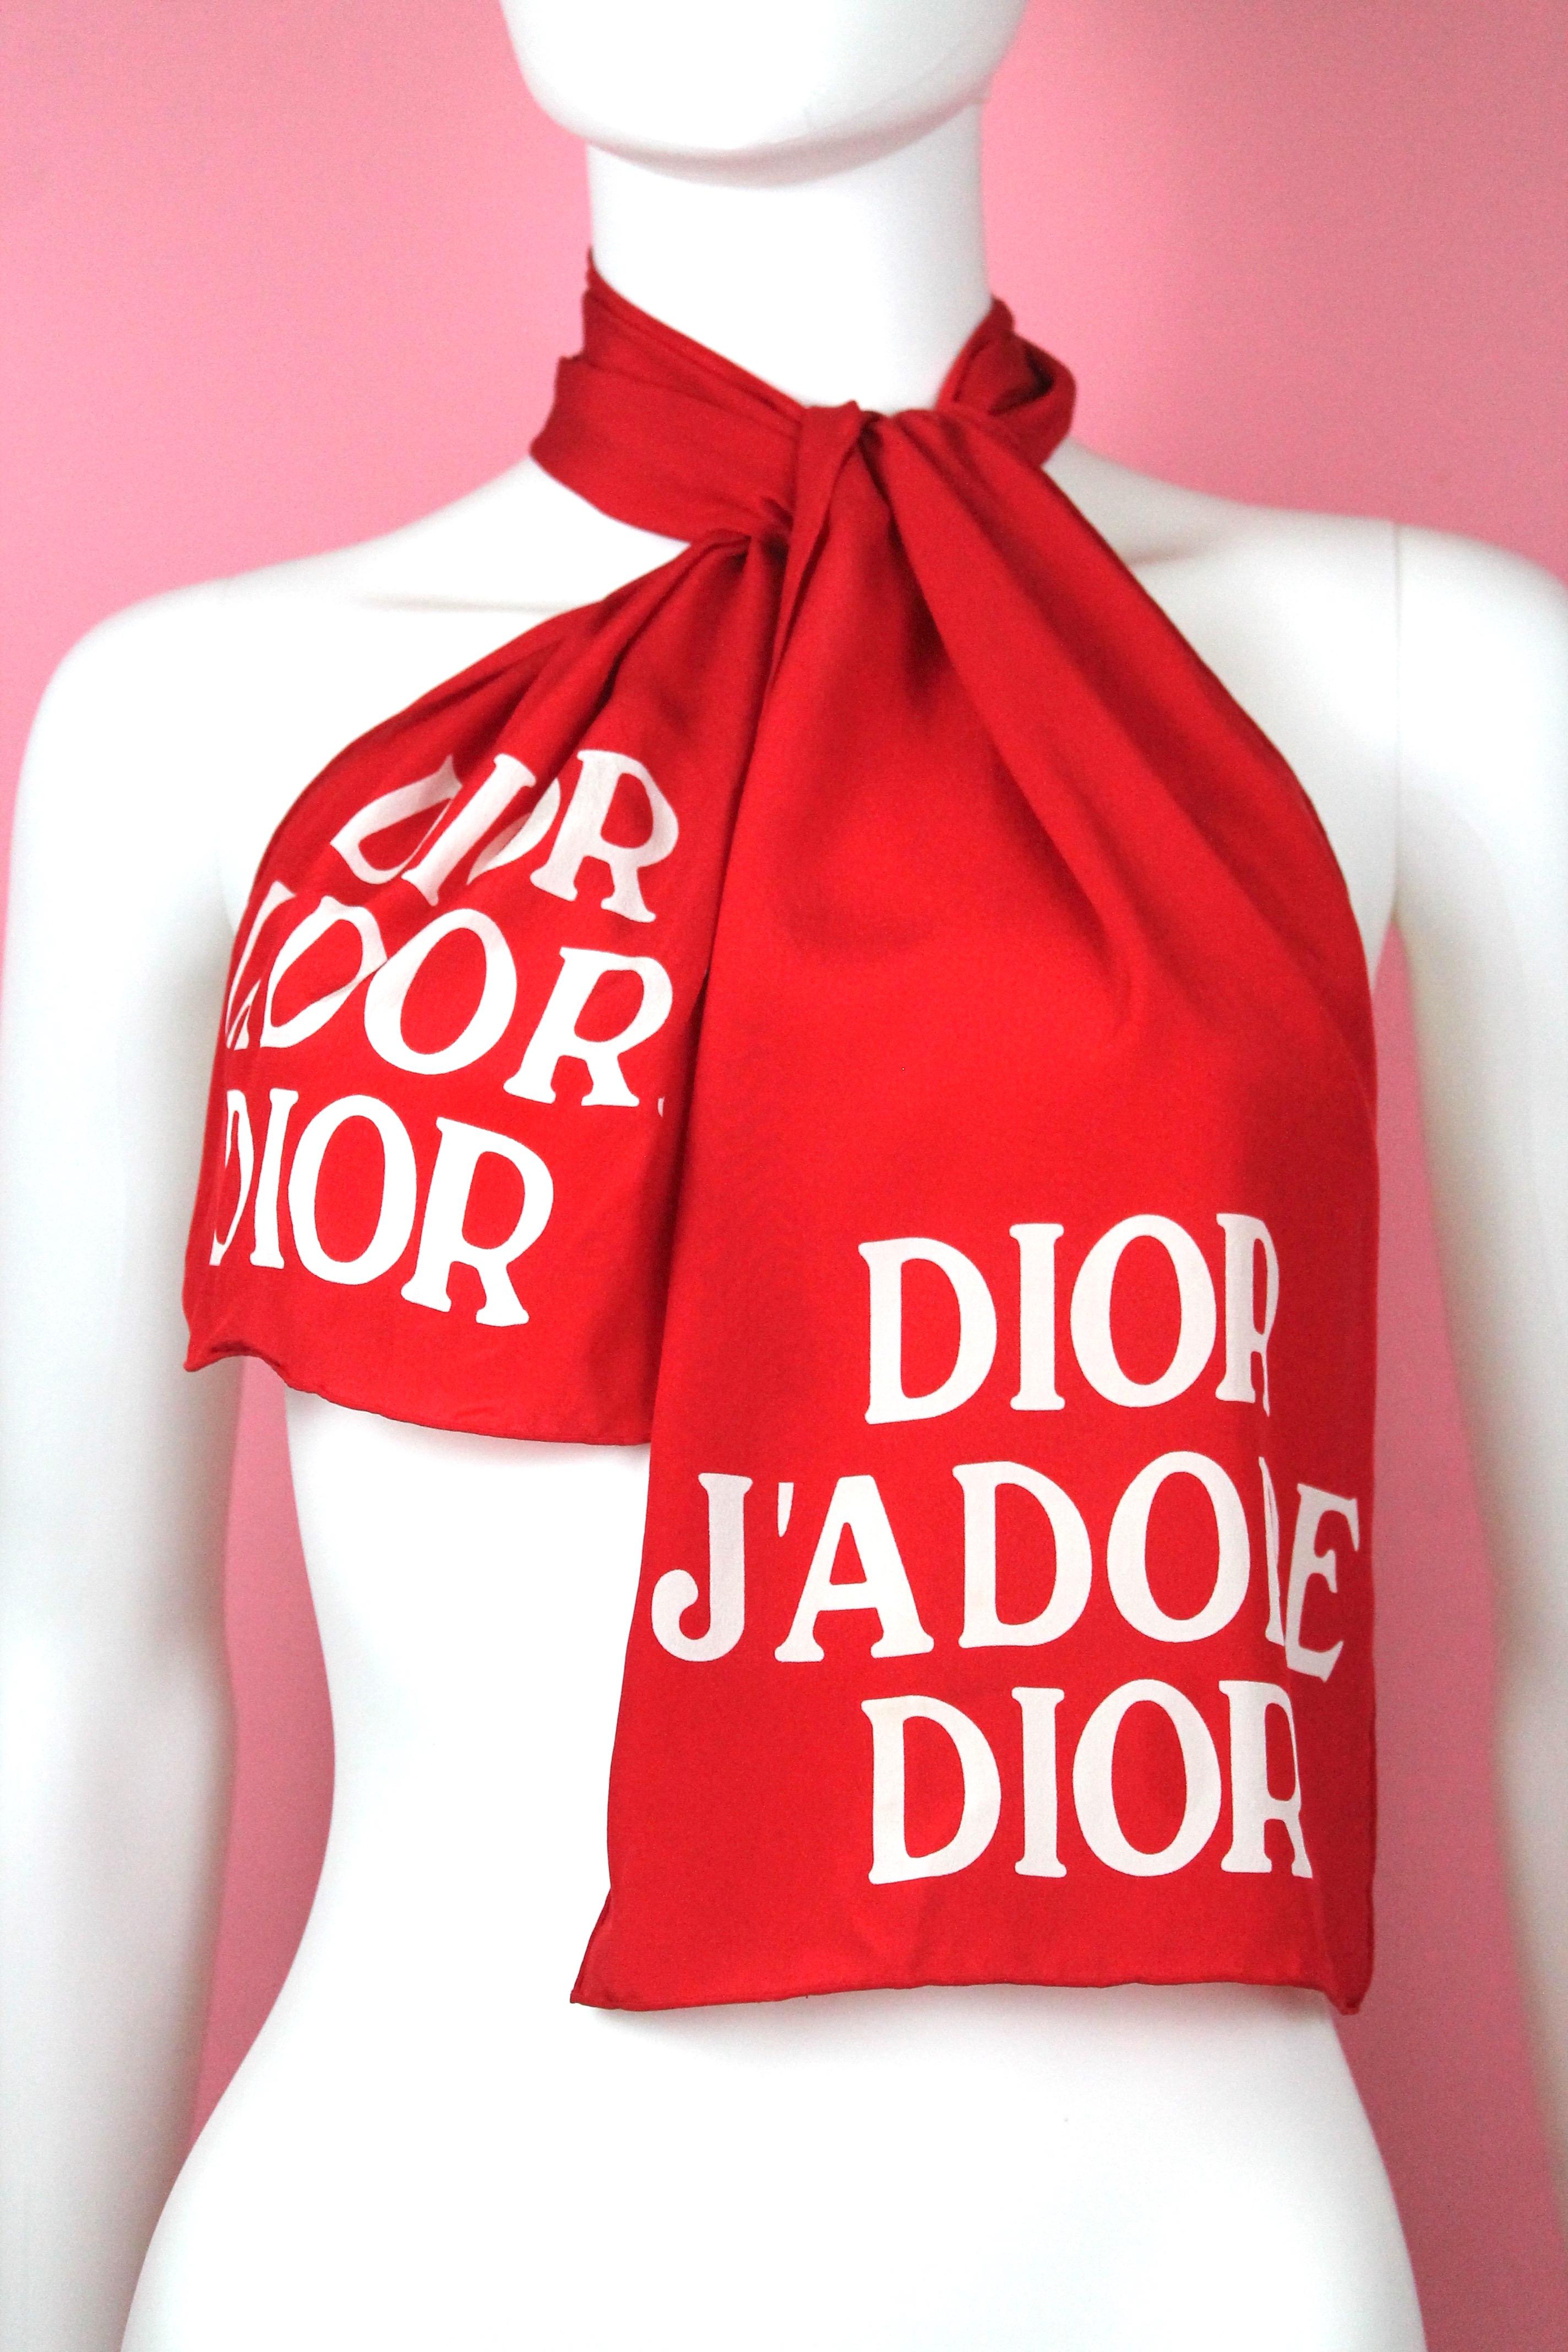 -Beautiful long silk scarf from Christian Dior, in vibrant red color. 
-Has Dior J'adore Dior on one end and the same font with logo on the other end. 
-From early 2000's
-Great light feel with sheer effect.

Approximate Measurements:
-10